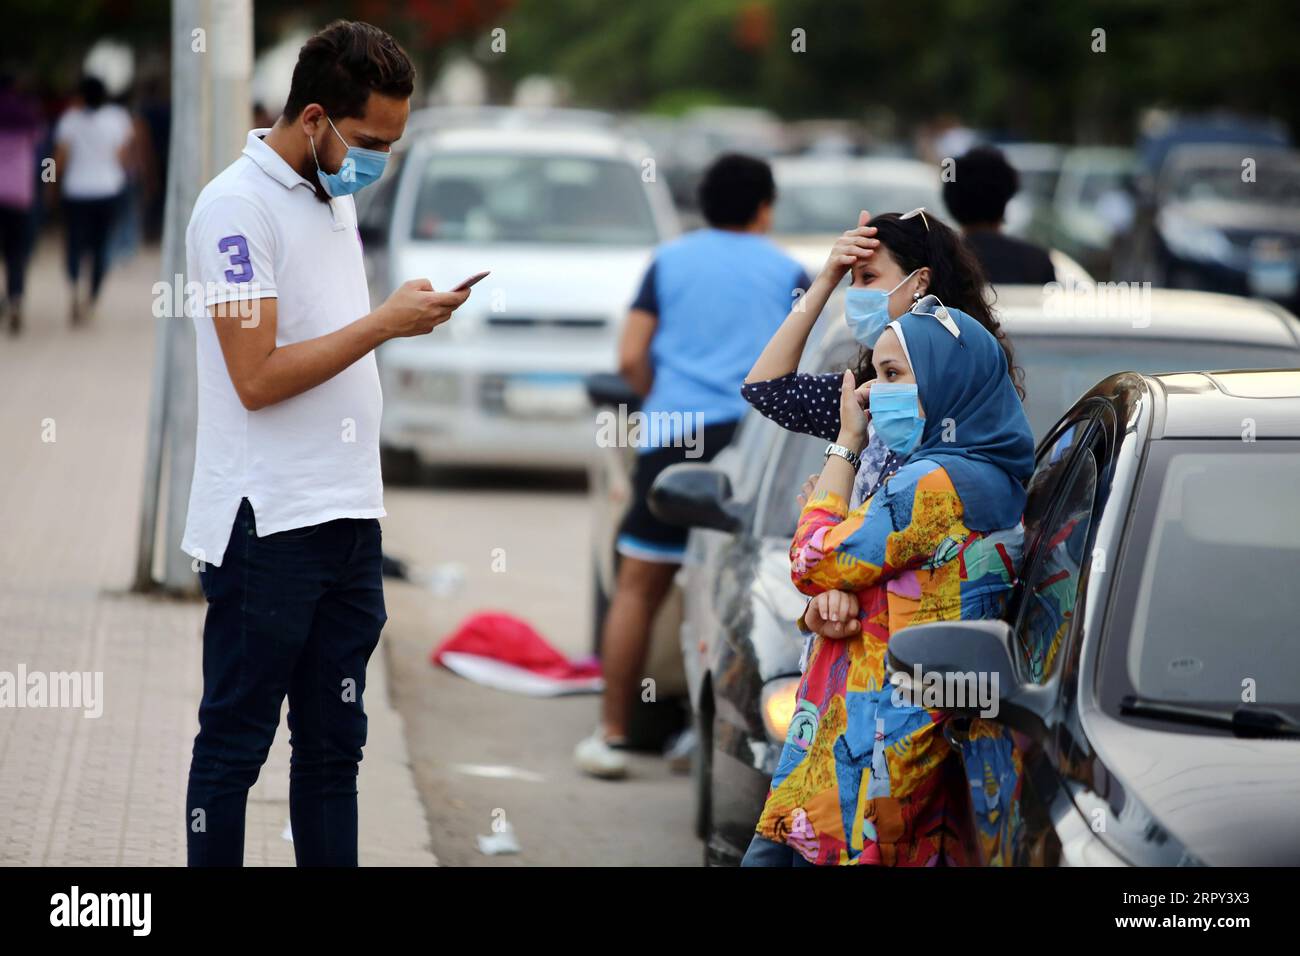 200612 -- CAIRO, June 12, 2020 Xinhua -- People wearing face masks are seen on a street in Cairo, Egypt, on June 12, 2020. Egypt witnessed on Friday a record of 1,577 single-day new COVID-19 cases, raising the total infections confirmed in the country since mid-February to 41,303, said spokesman with the Health Ministry. Xinhua/Ahmed Gomaa EGYPT-CAIRO-COVID-19-CASES PUBLICATIONxNOTxINxCHN Stock Photo